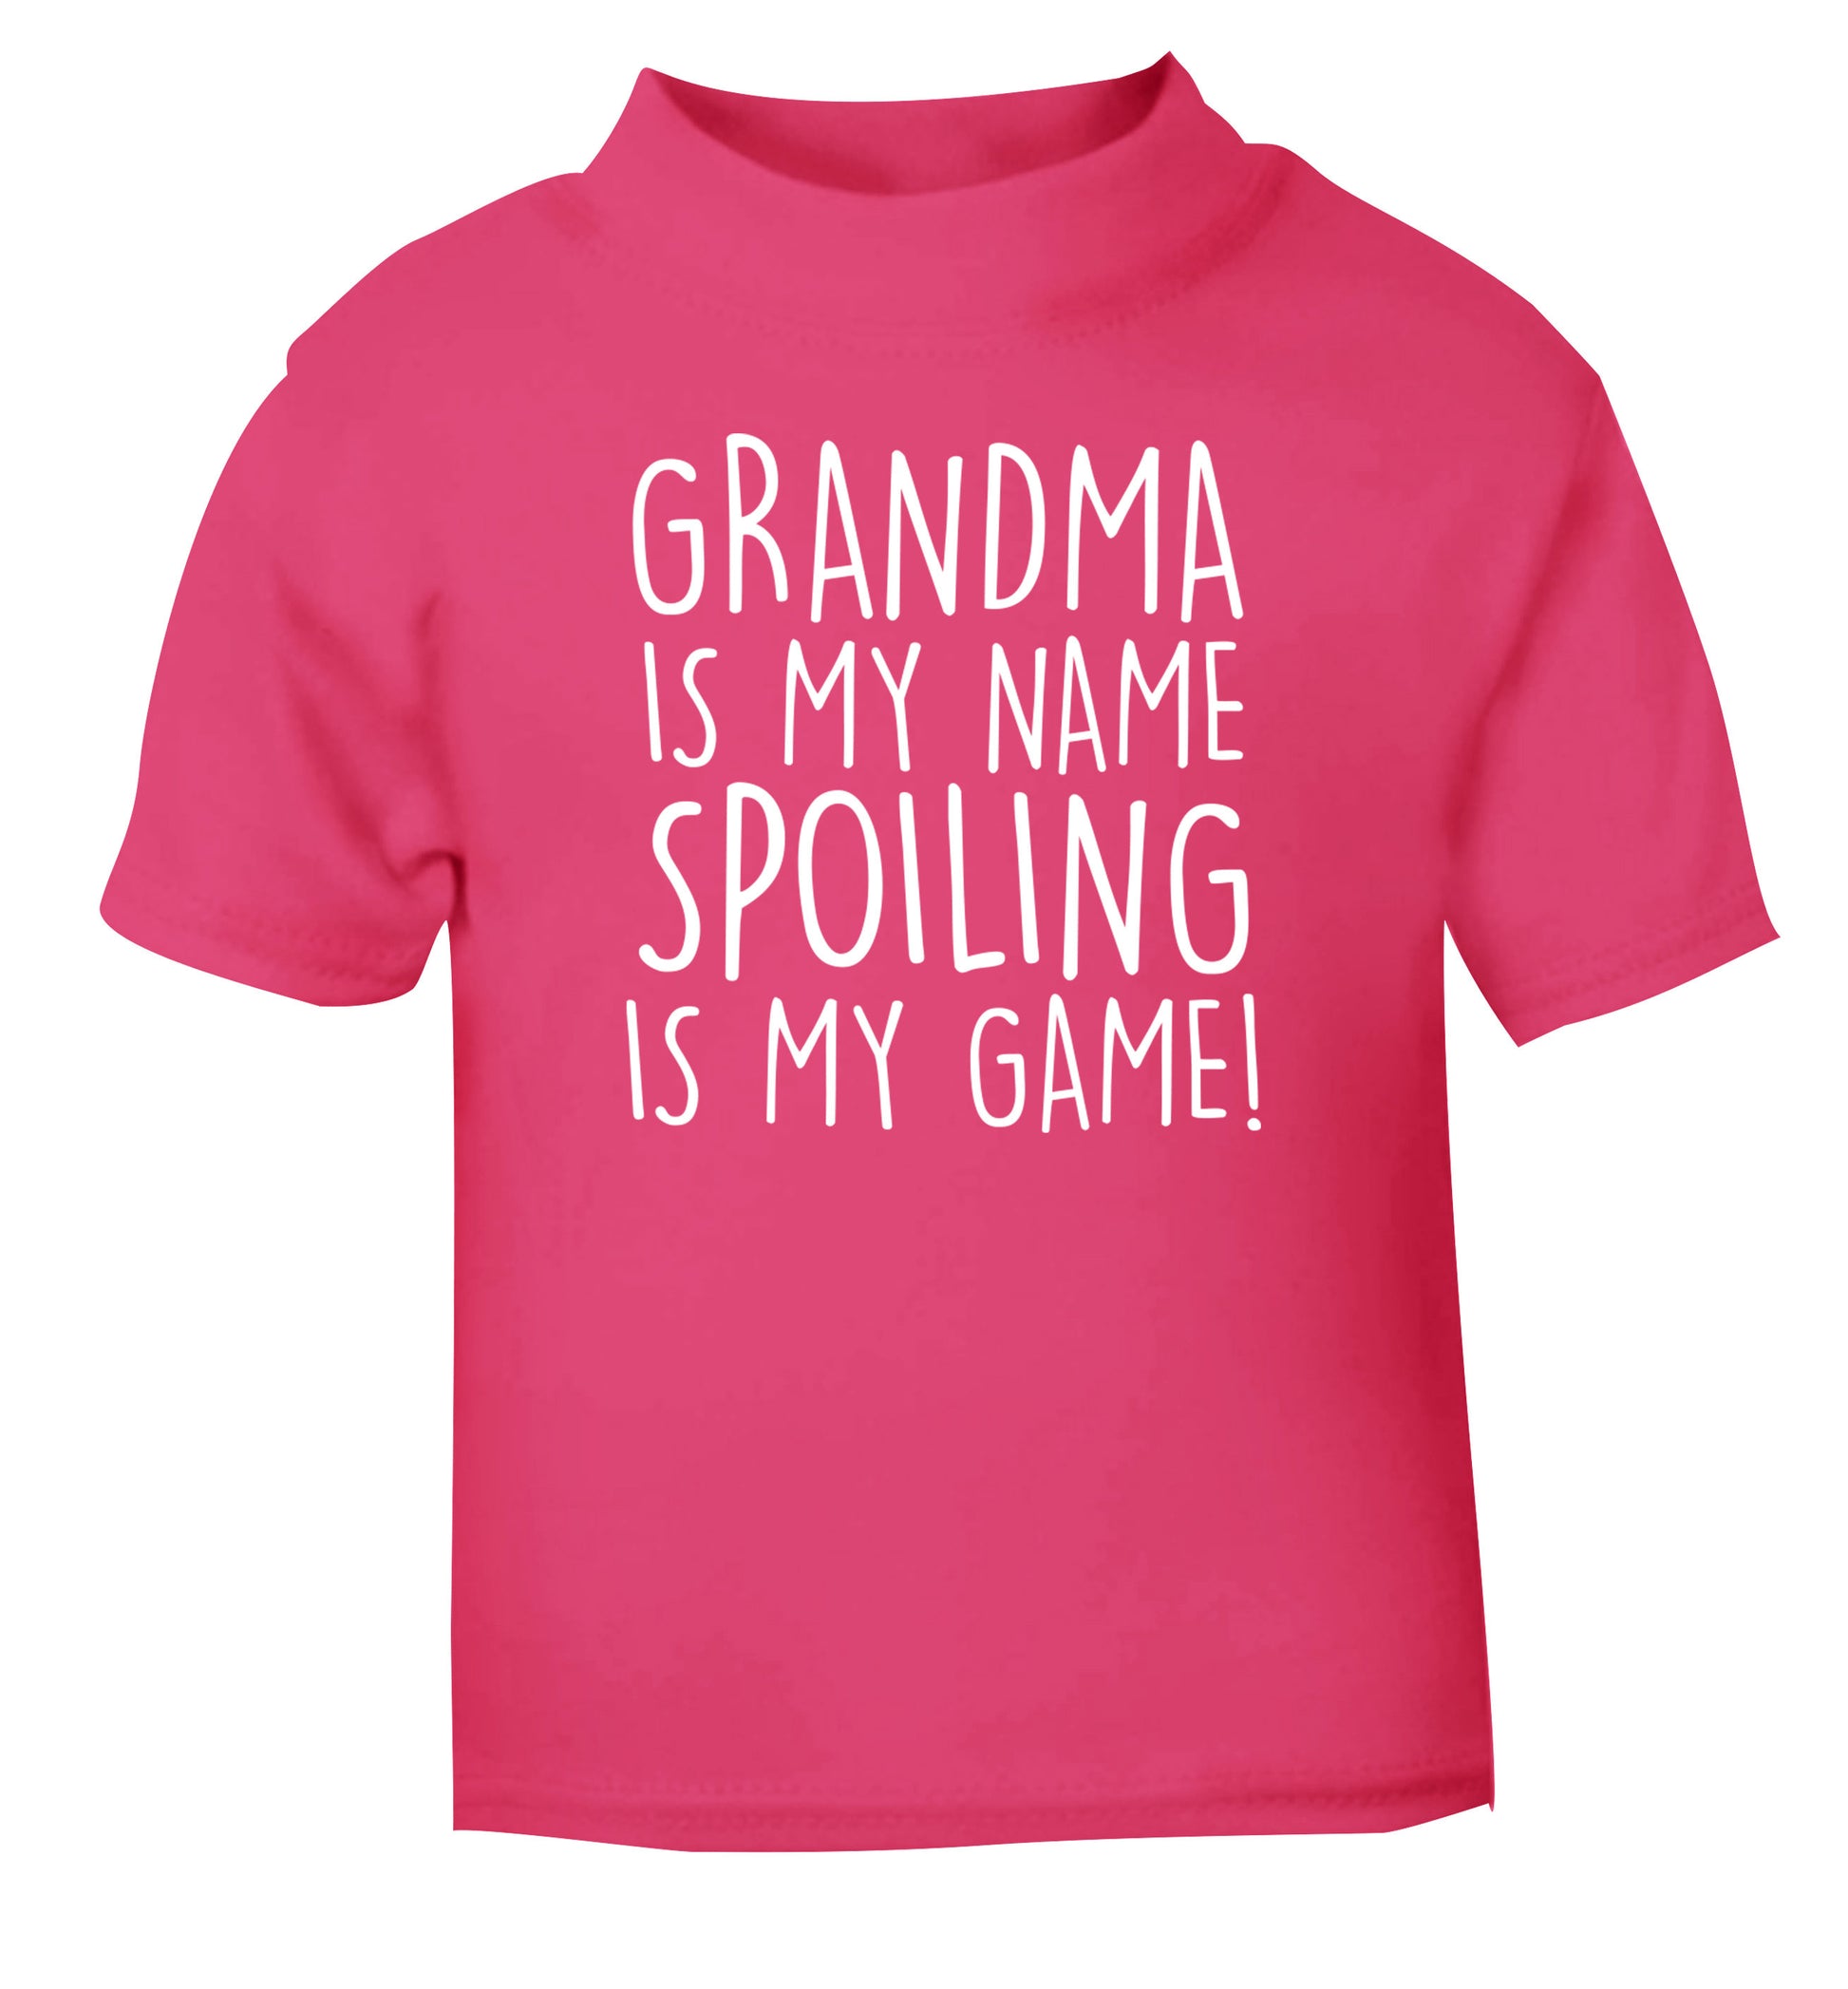 Grandma is my name, spoiling is my game pink Baby Toddler Tshirt 2 Years